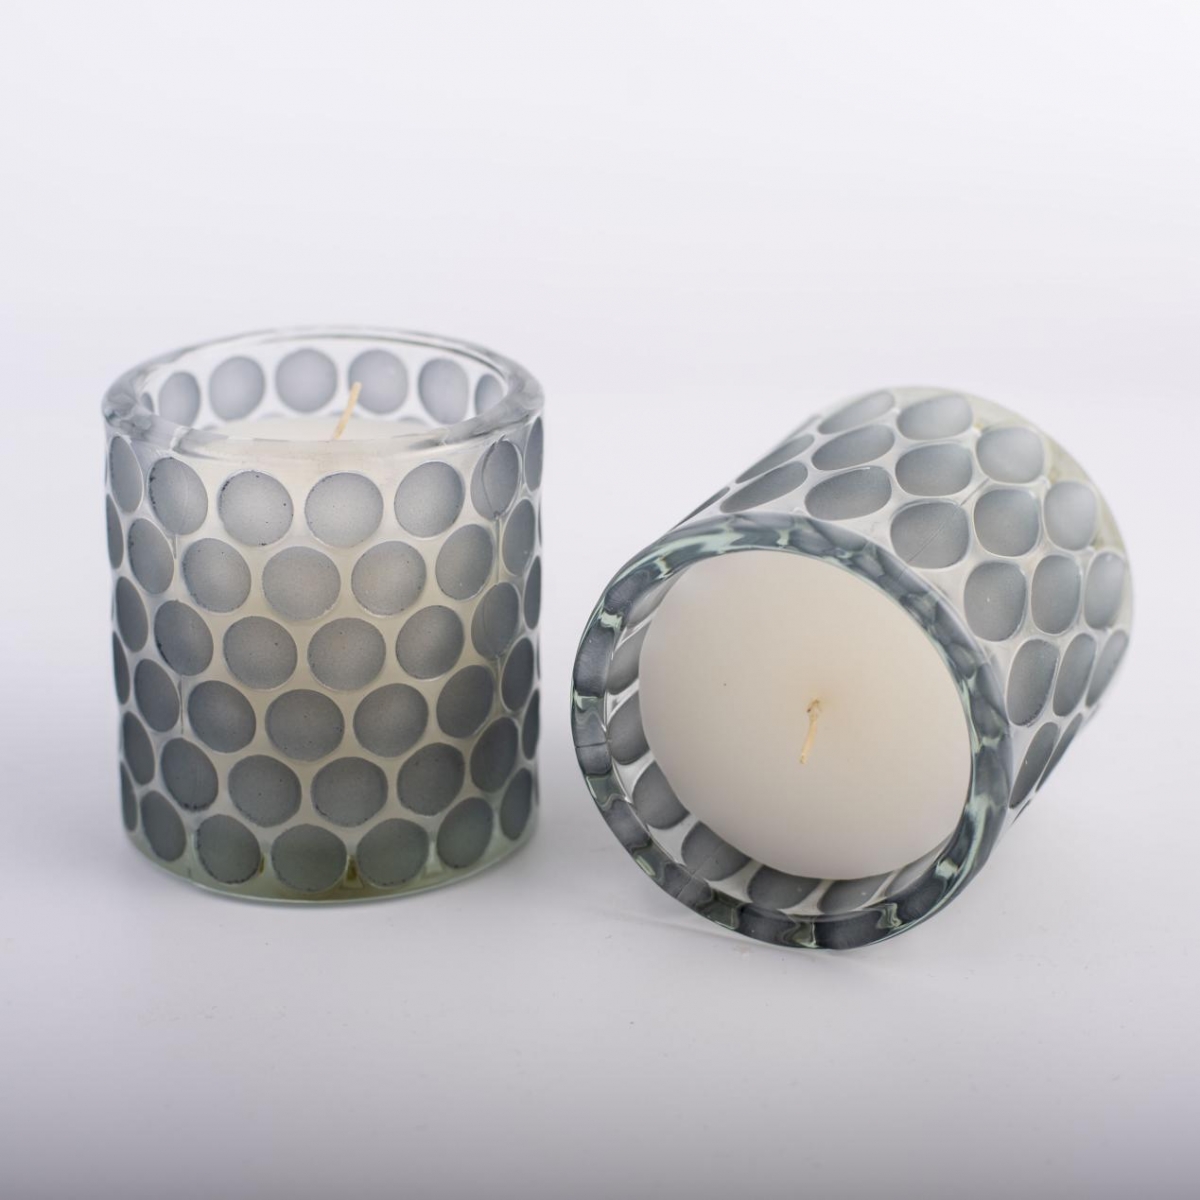 Scented Candles-Best Soy Wax ,Essential Oil Candles ,Polish Honeycomb Embossed Candle Jar ,China Factory ,Price-HOWCANDLE-Candles,Scented Candles,Aromatherapy Candles,Soy Candles,Vegan Candles,Jar Candles,Pillar Candles,Candle Gift Sets,Essential Oils,Reed Diffuser,Candle Holder,